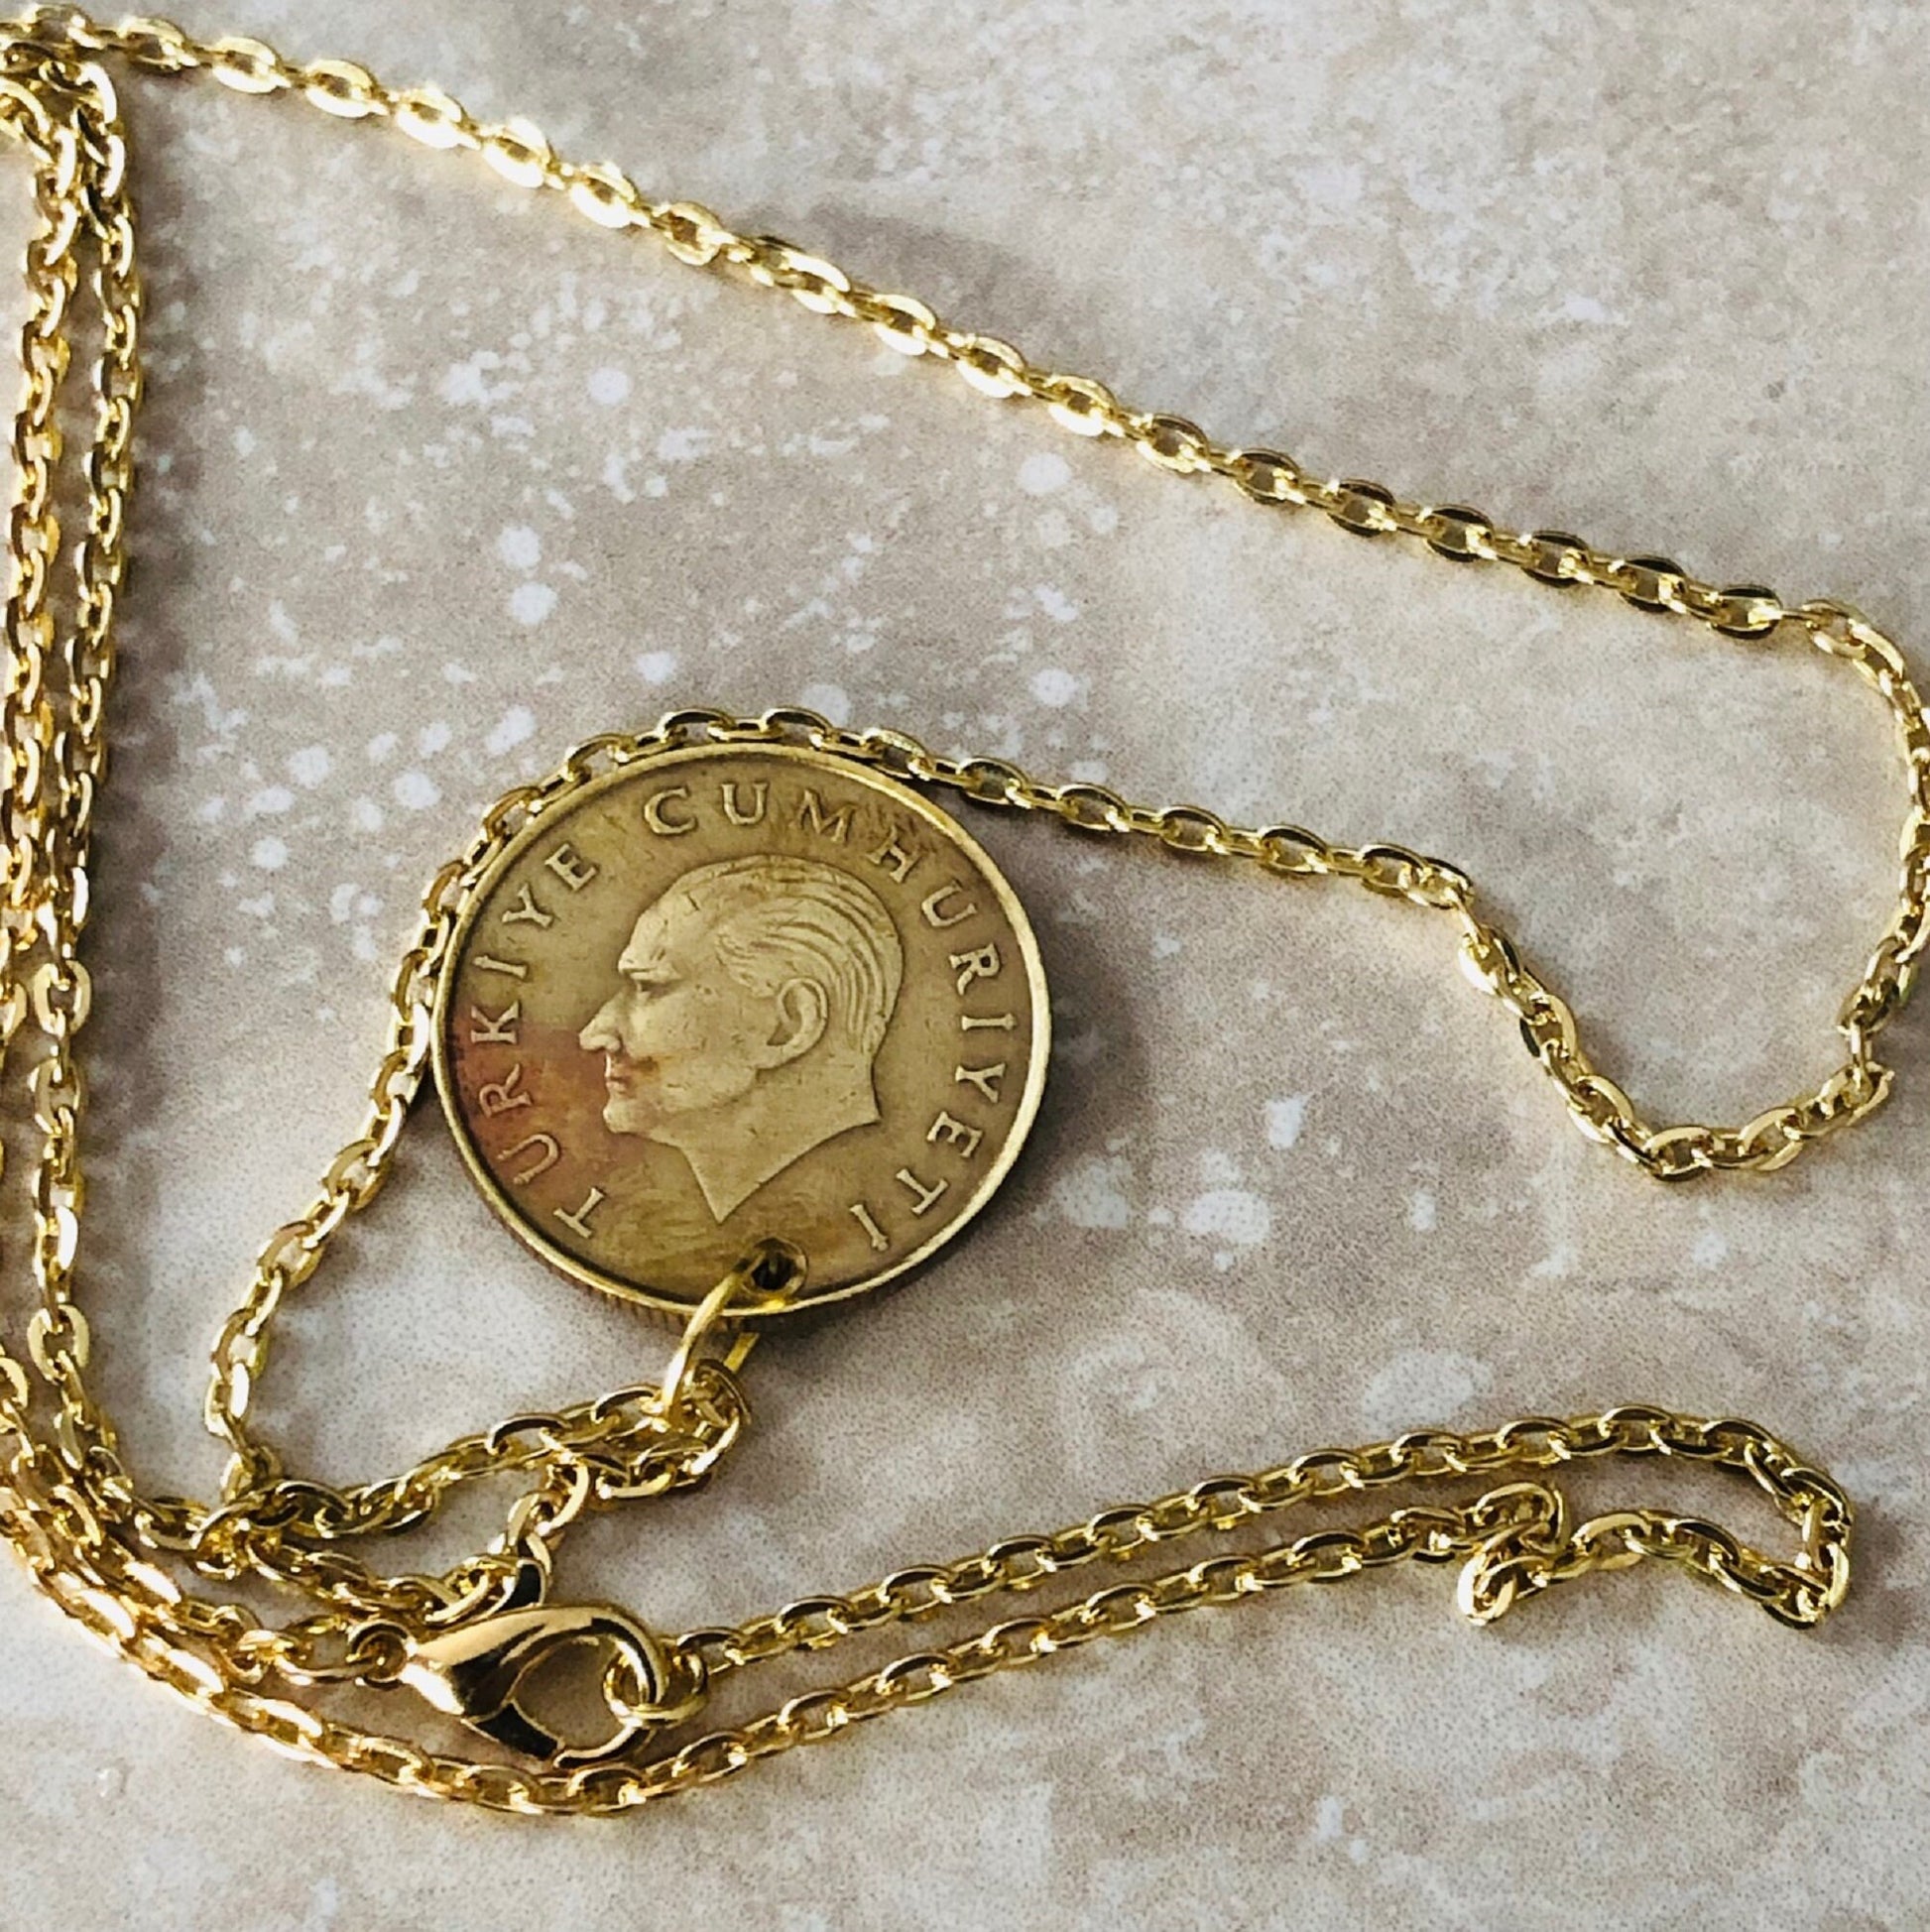 Turkey Coin Necklace Turkish 500 Lira Pendant Personal Old Vintage Handmade Jewelry Gift Friend Charm For Him Her World Coin Collector